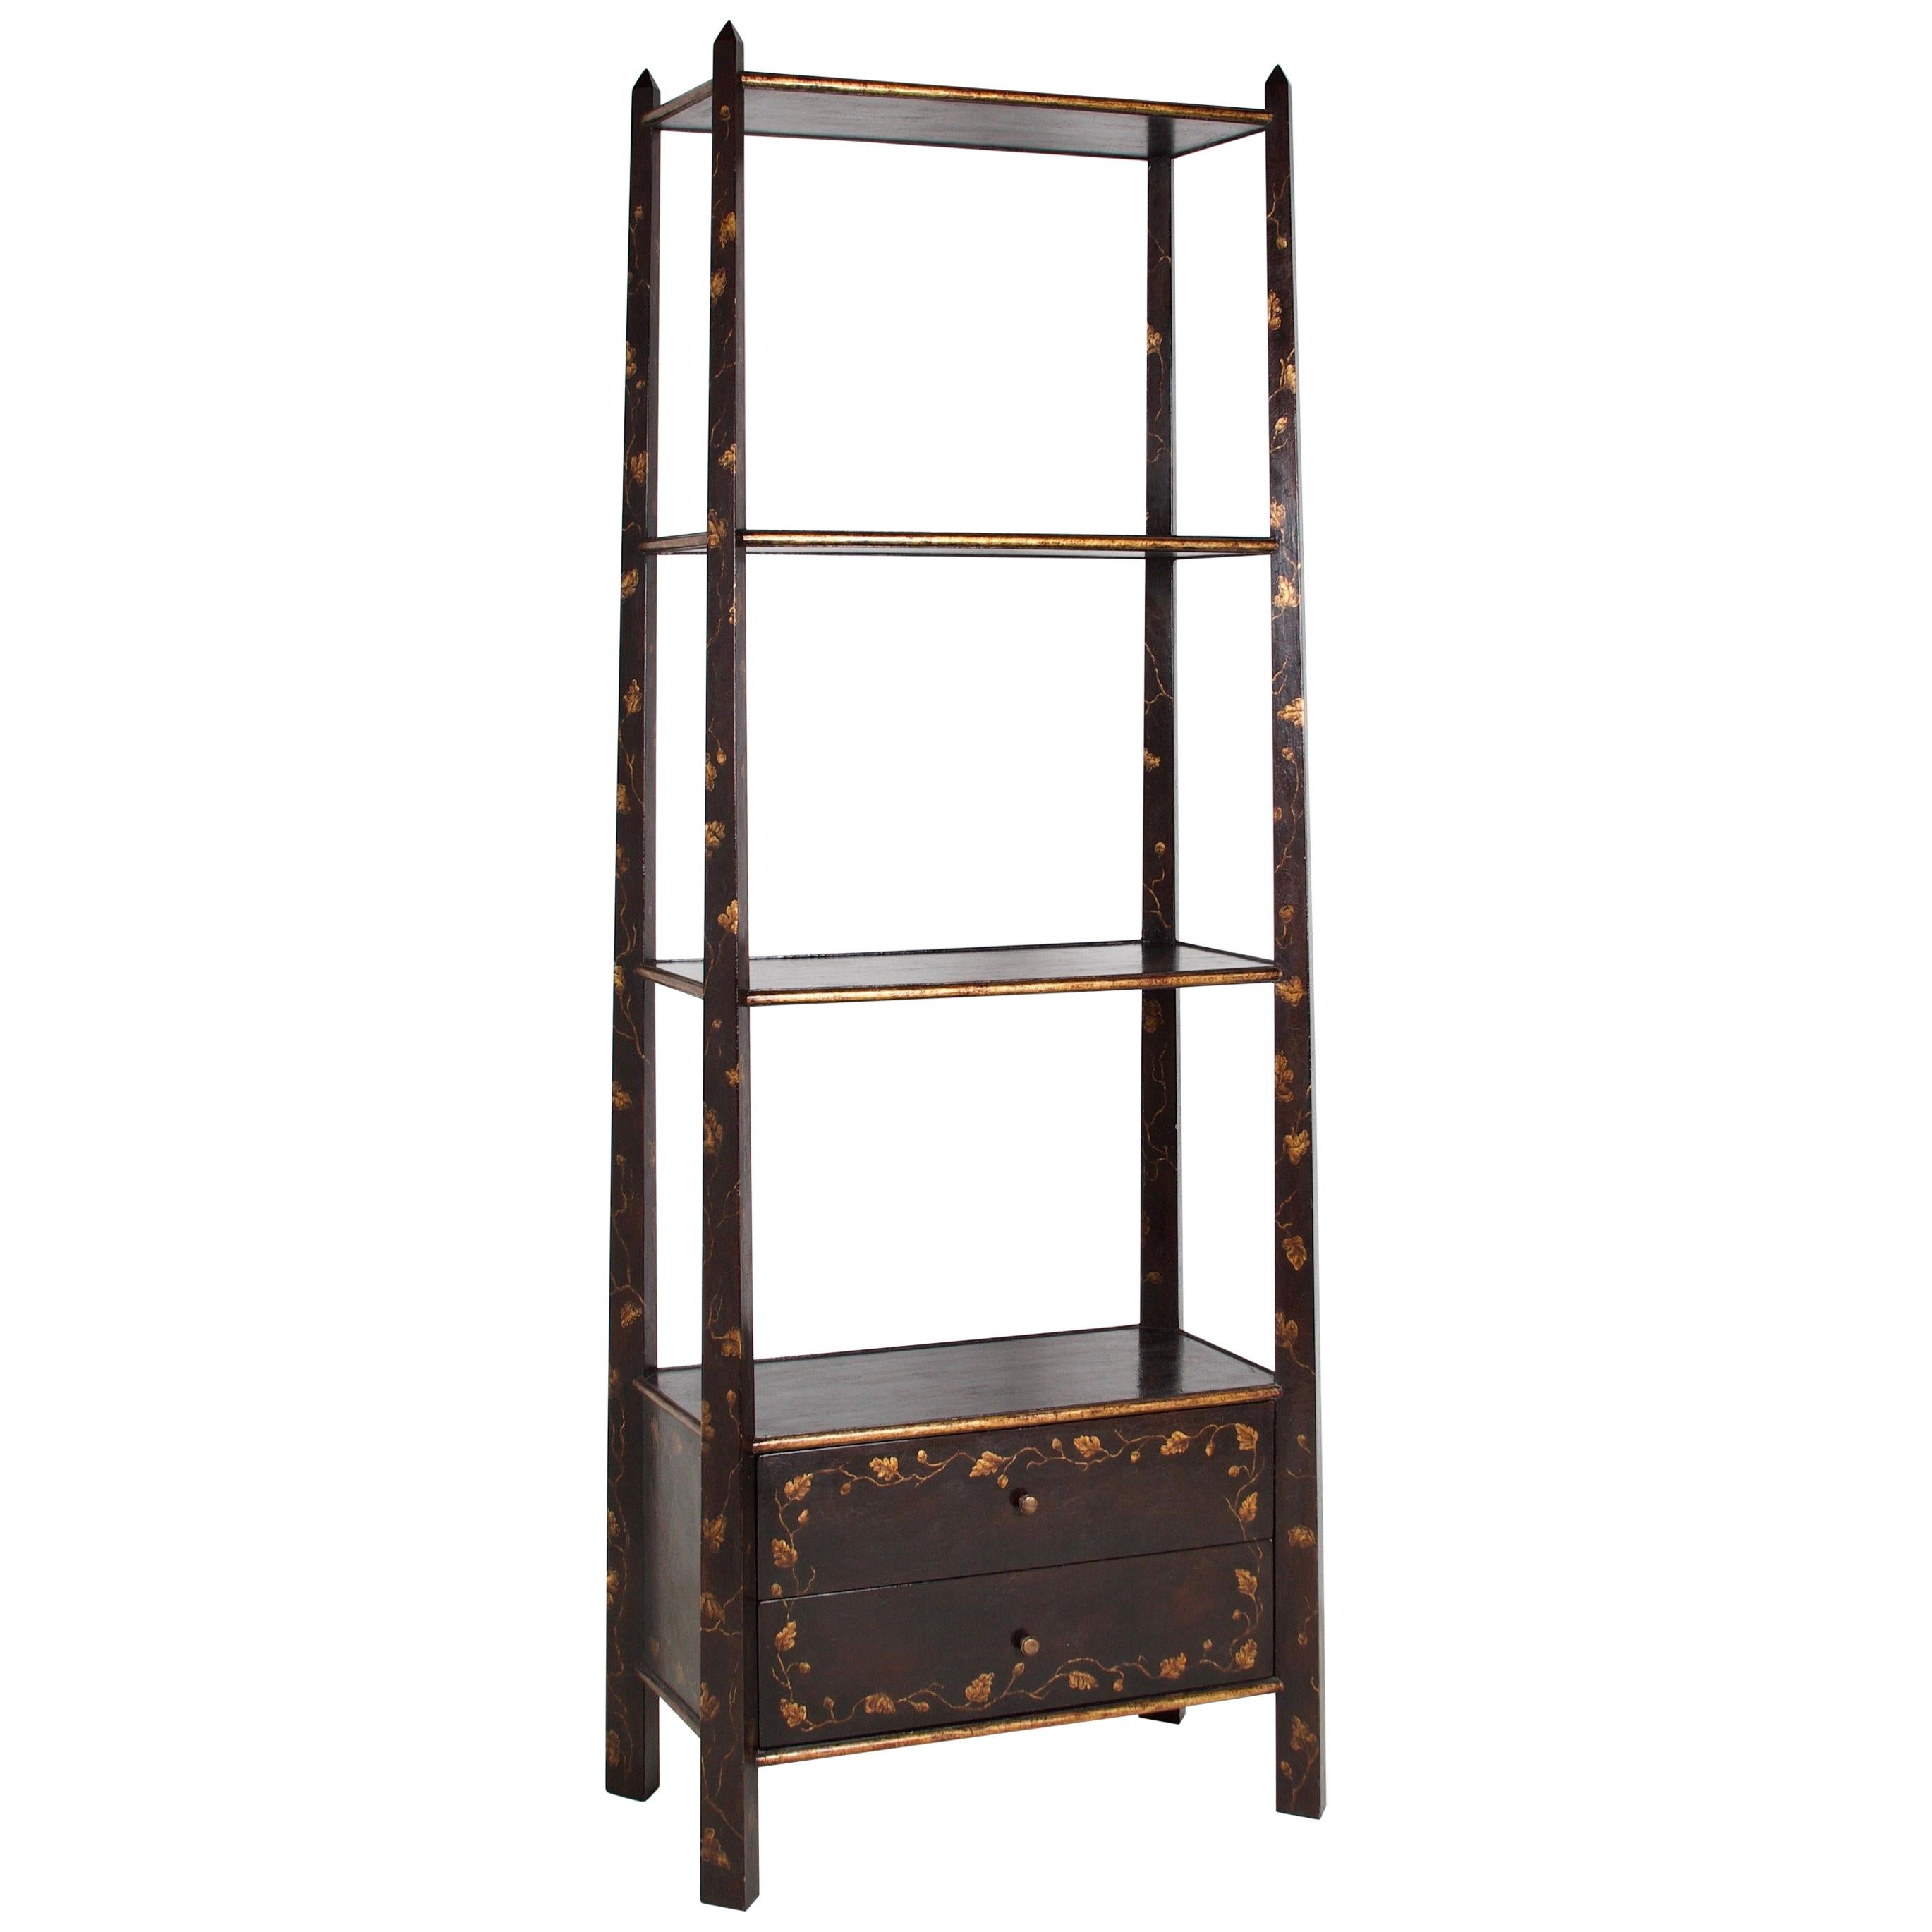 Bookcase/Etagere, by Rose Tarlow, chinoiserie decor.